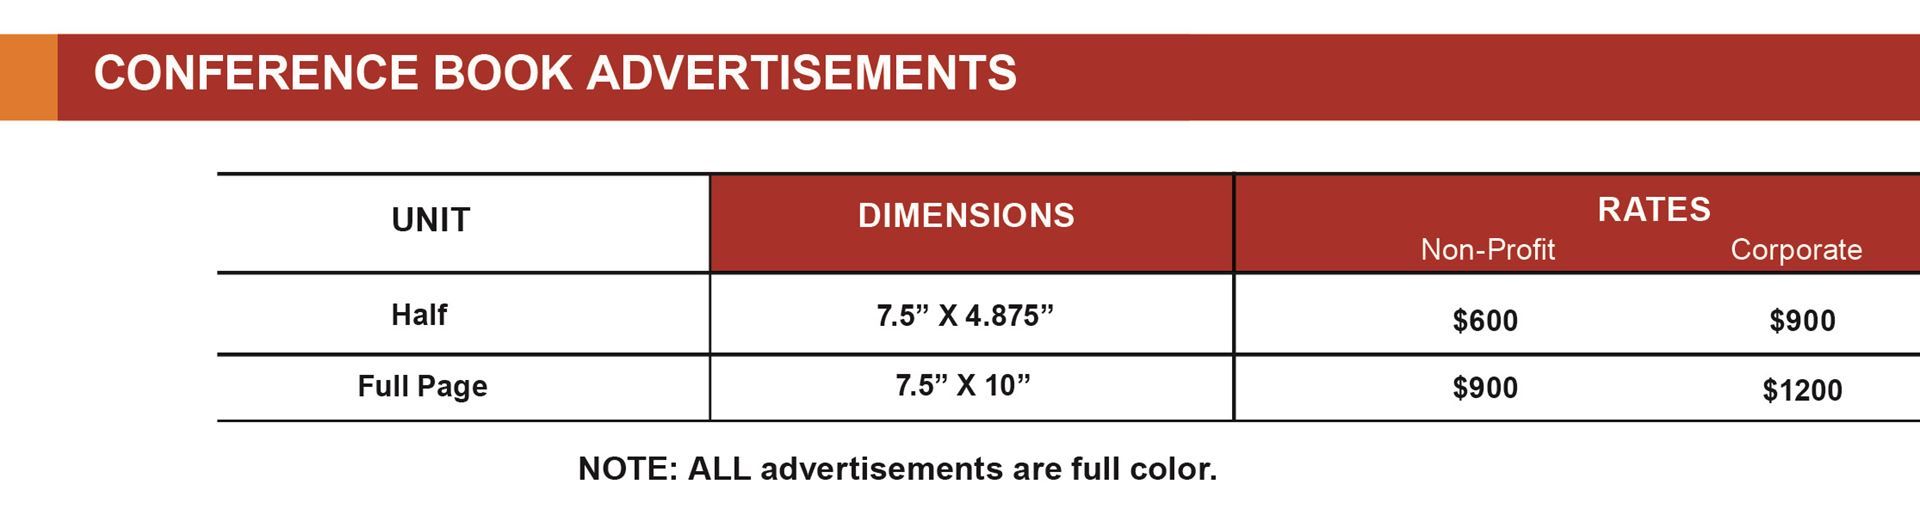 conference advertisement fees